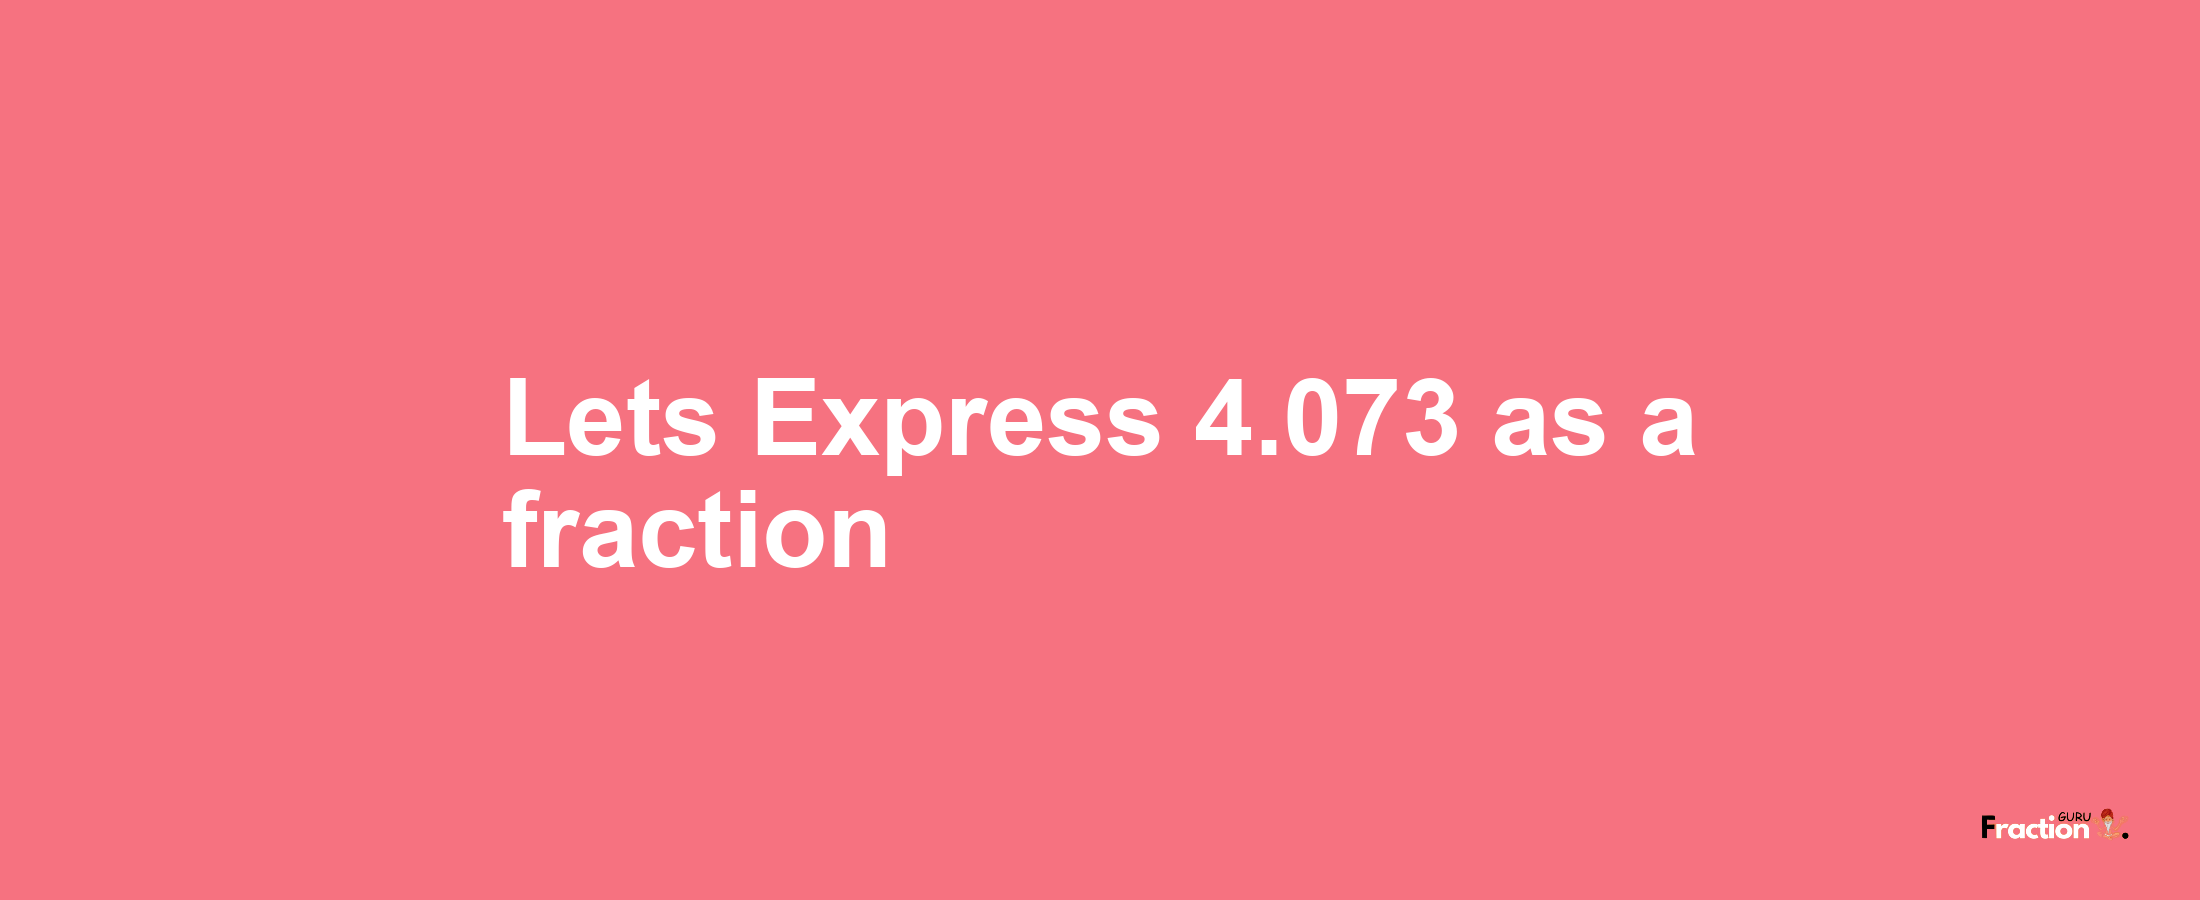 Lets Express 4.073 as afraction